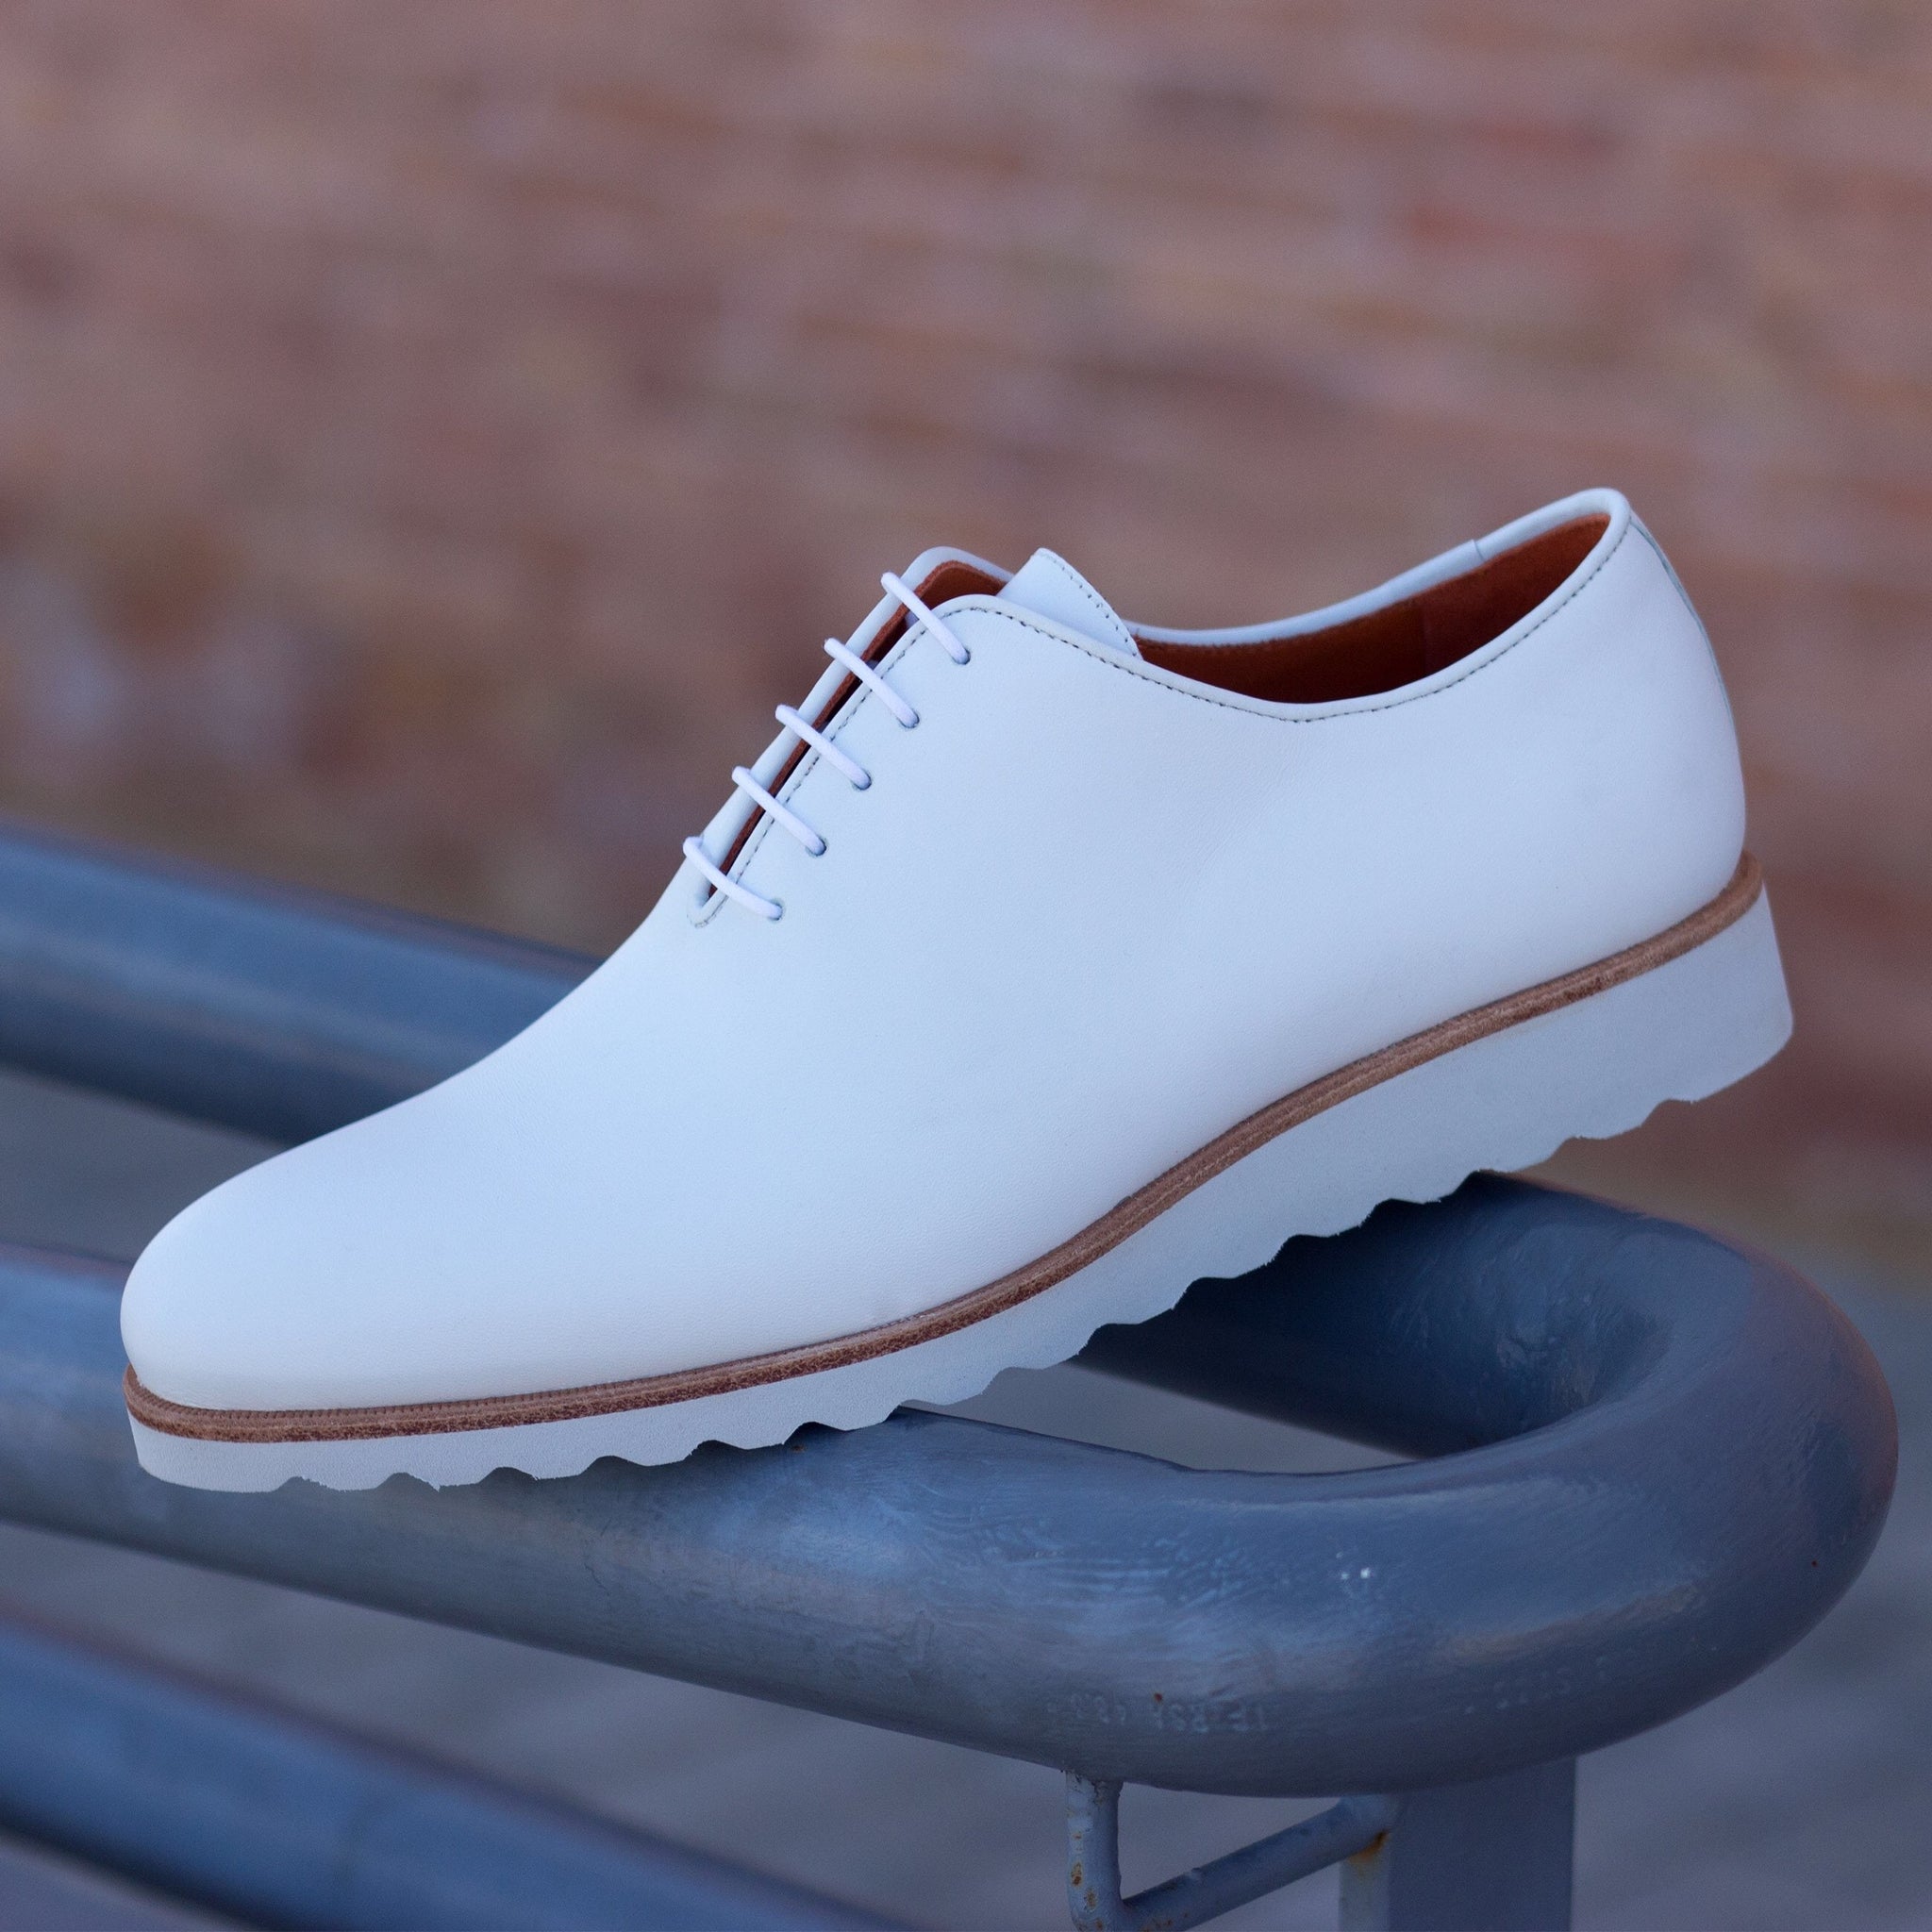 Unique Handcrafted All White Whole-cut w/ White Wedge sole